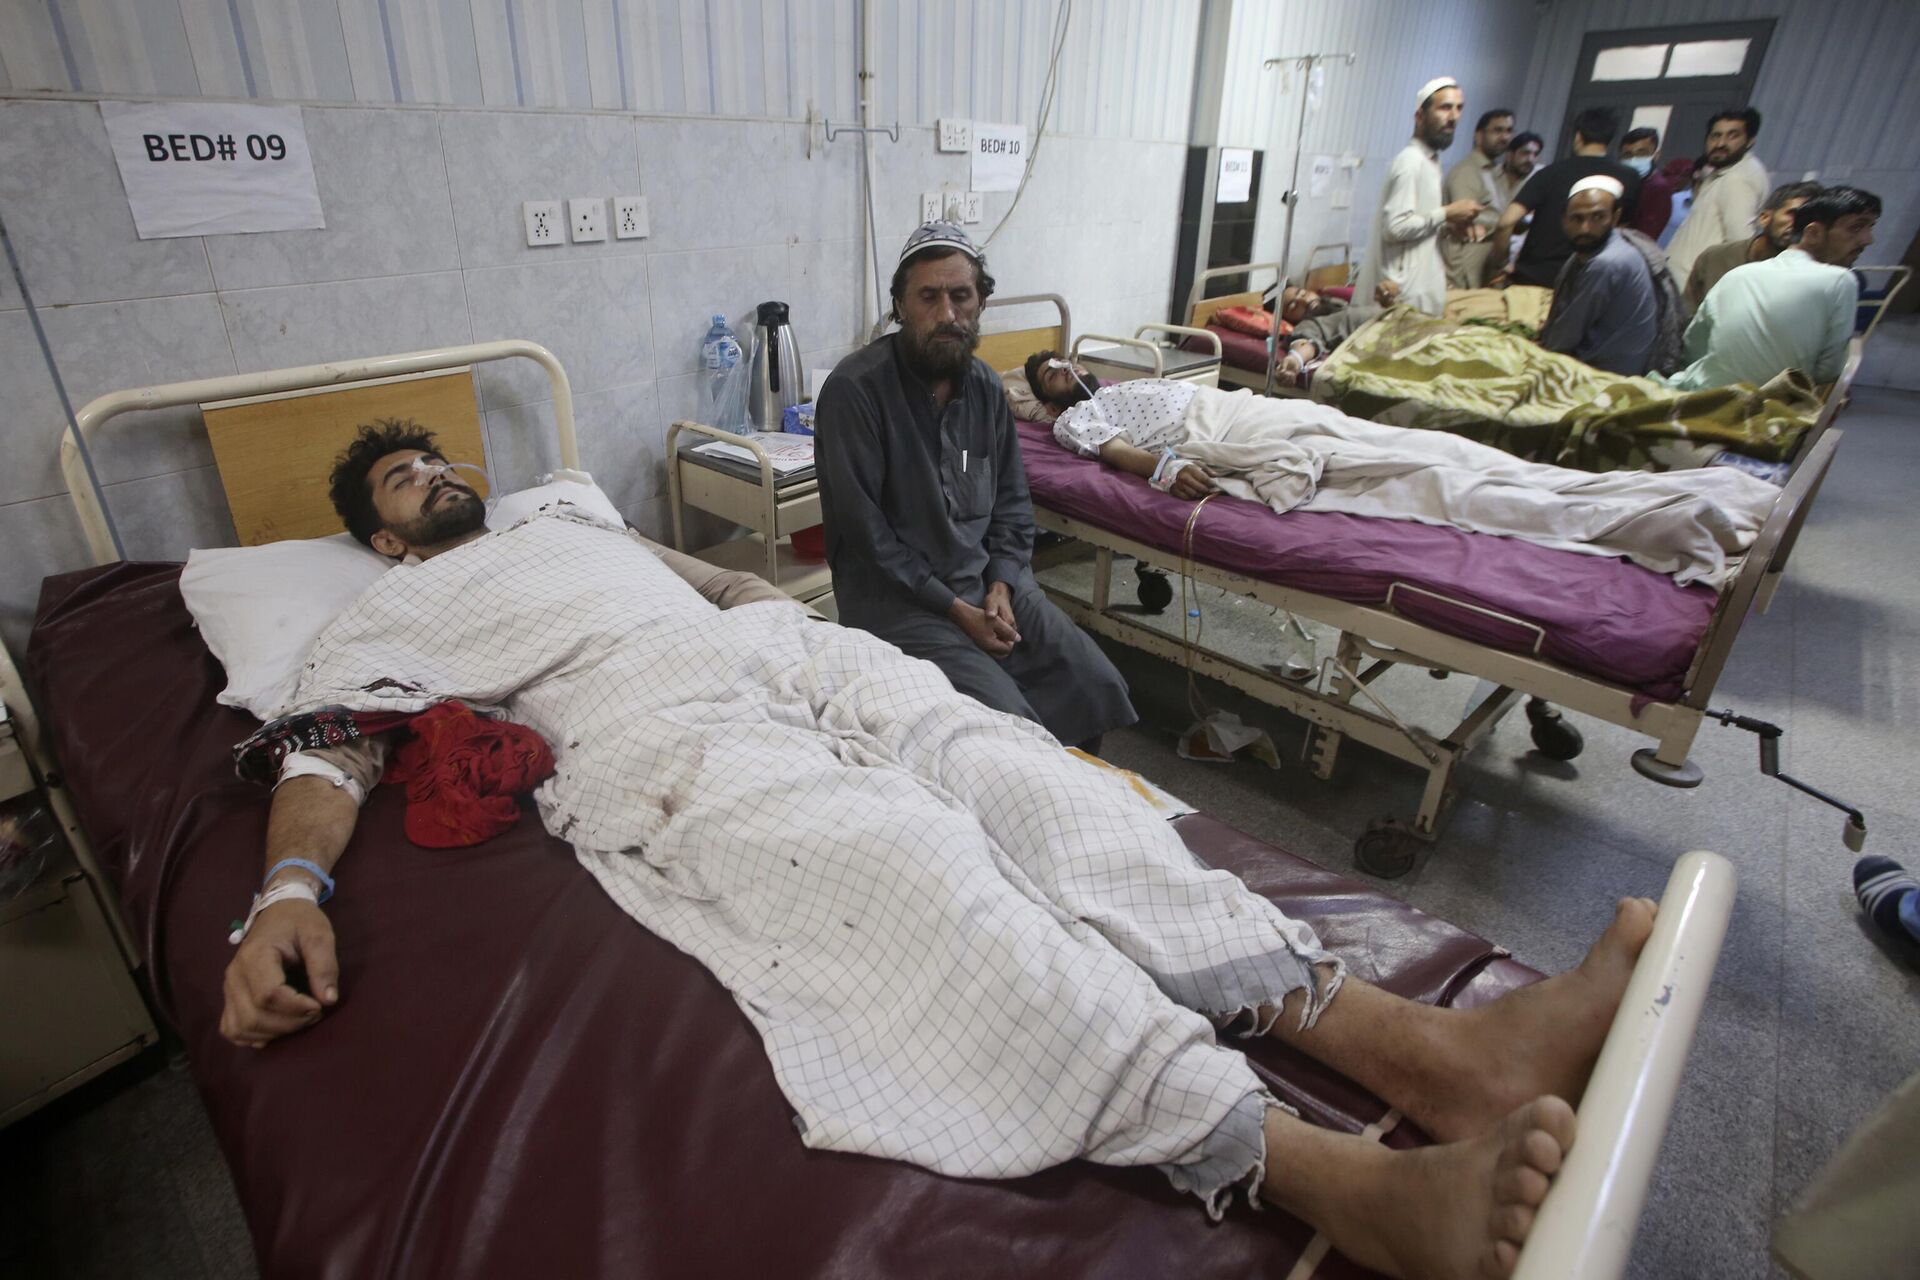 People who were injured in the clashes between police and supporters of Pakistan's former Prime Minister Imran Khan are treated at a hospital in Peshawar, Pakistan, Thursday, May 11, 2023. - Sputnik India, 1920, 11.05.2023